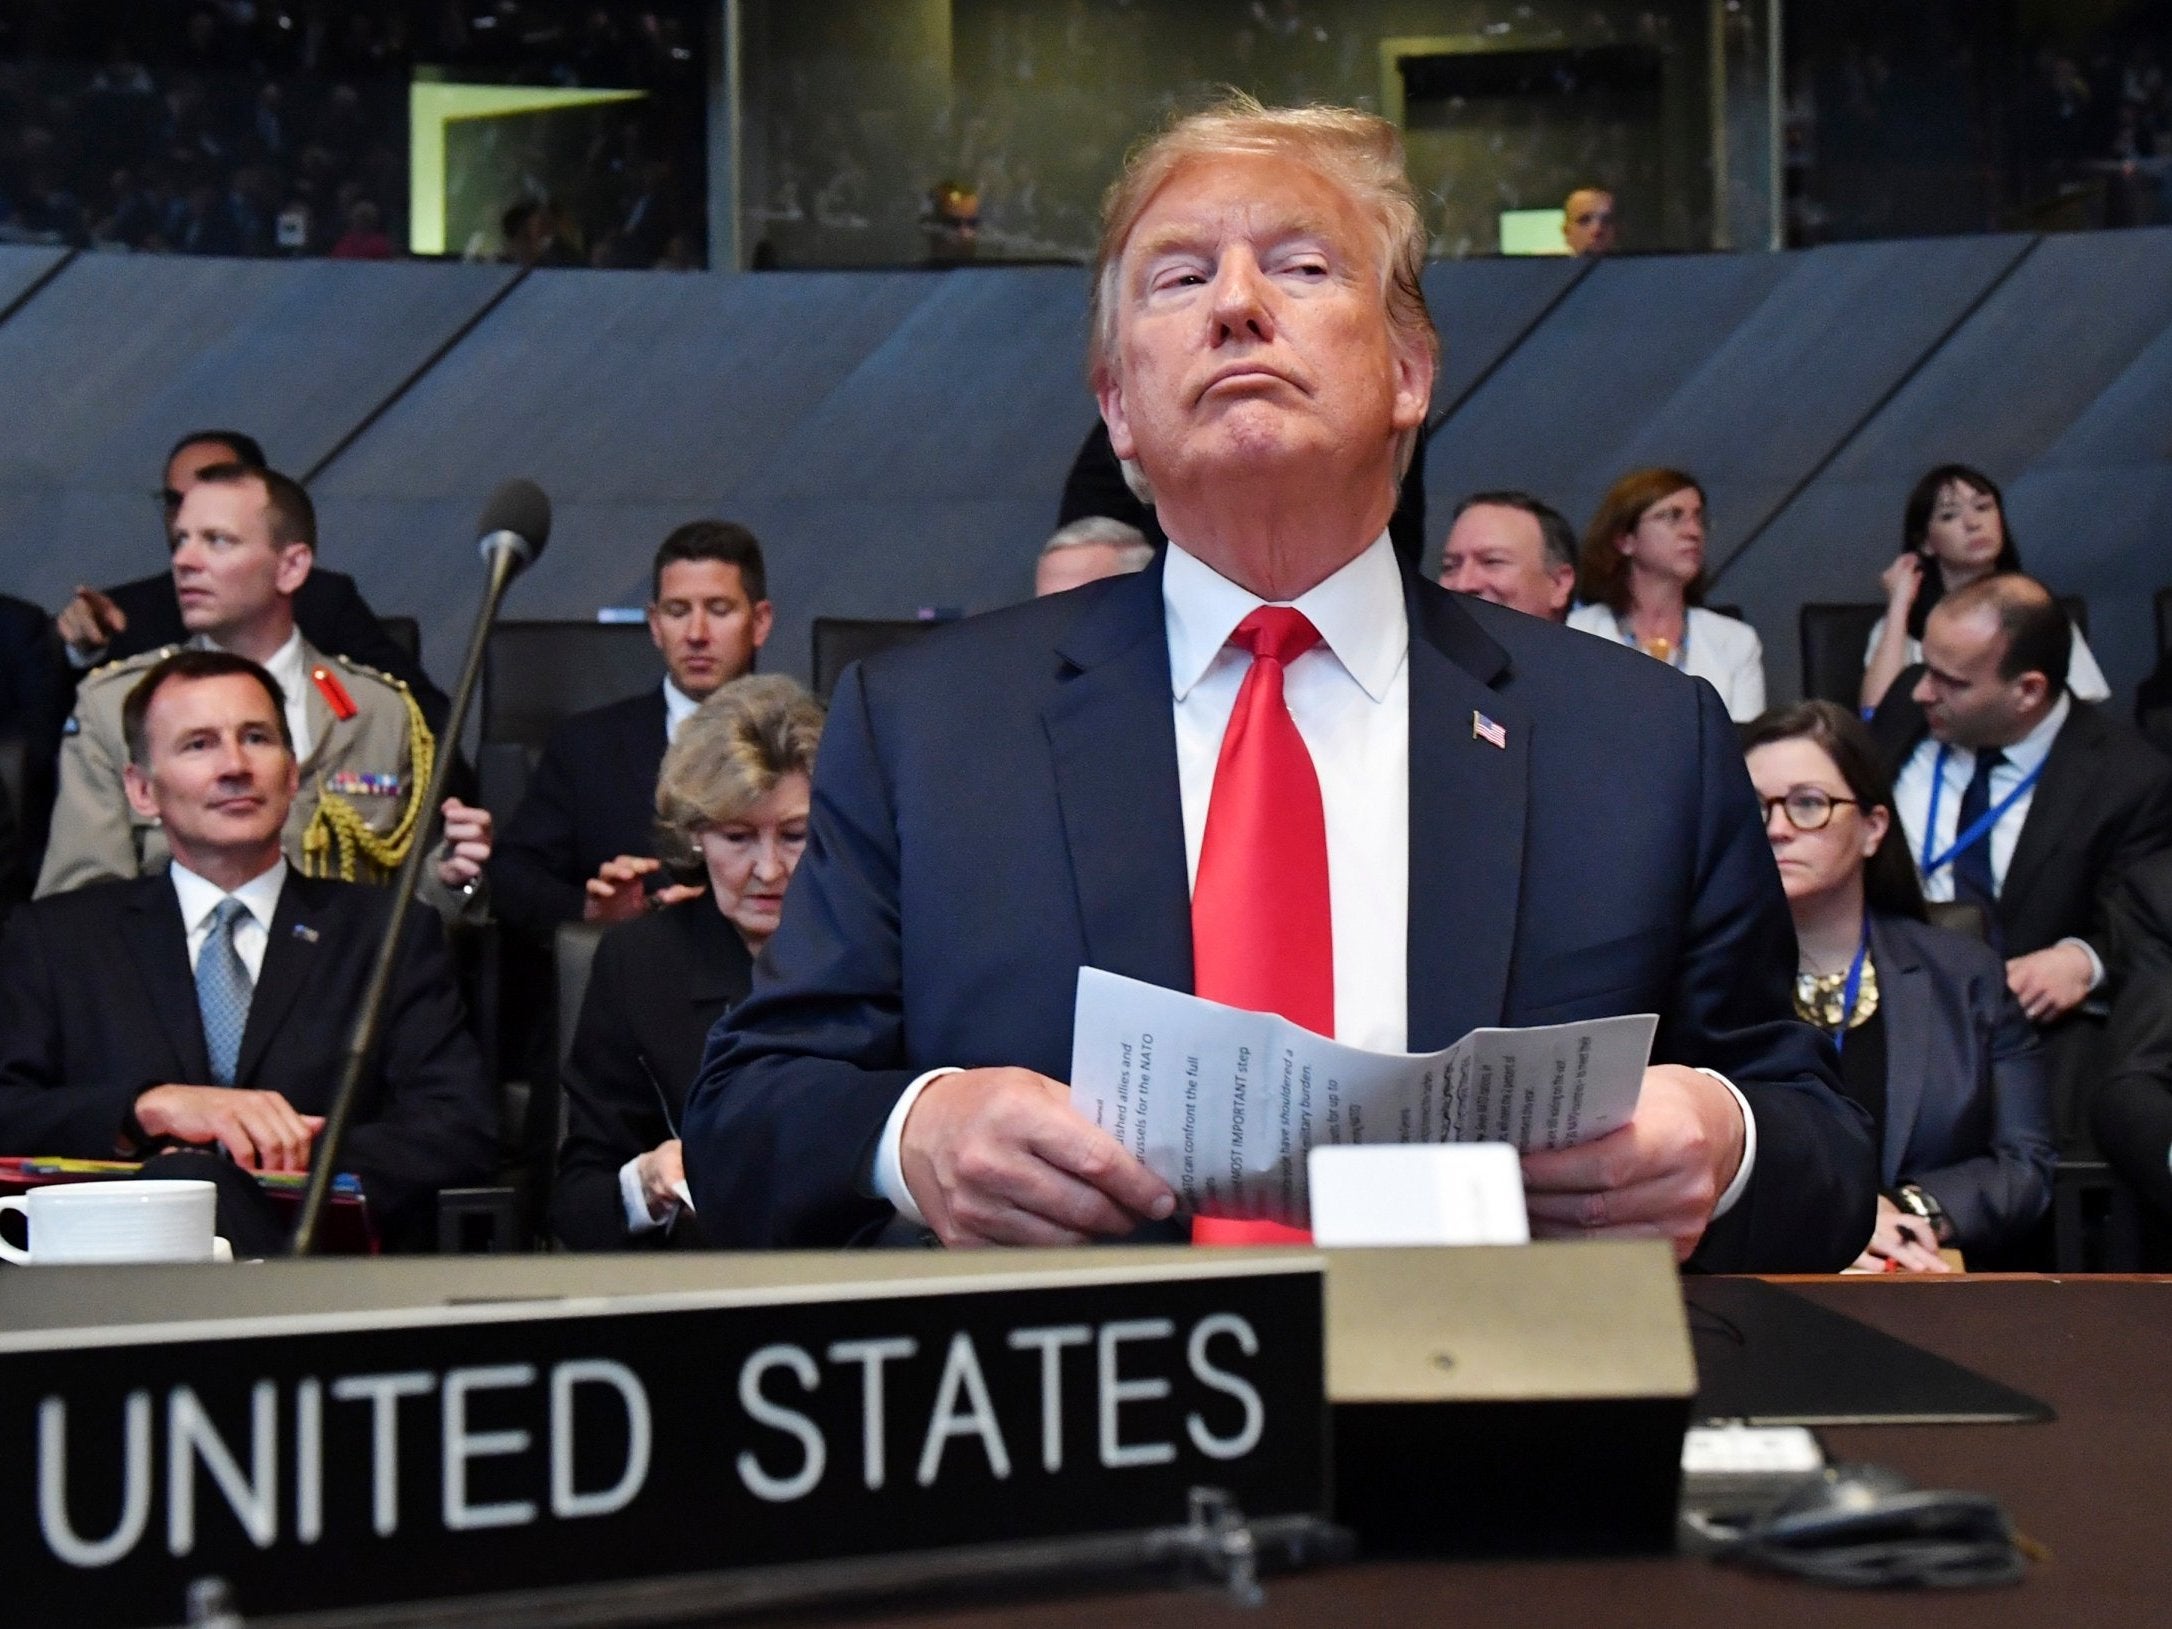 Trump during a summit of heads of state at Nato headquarters in Brussels